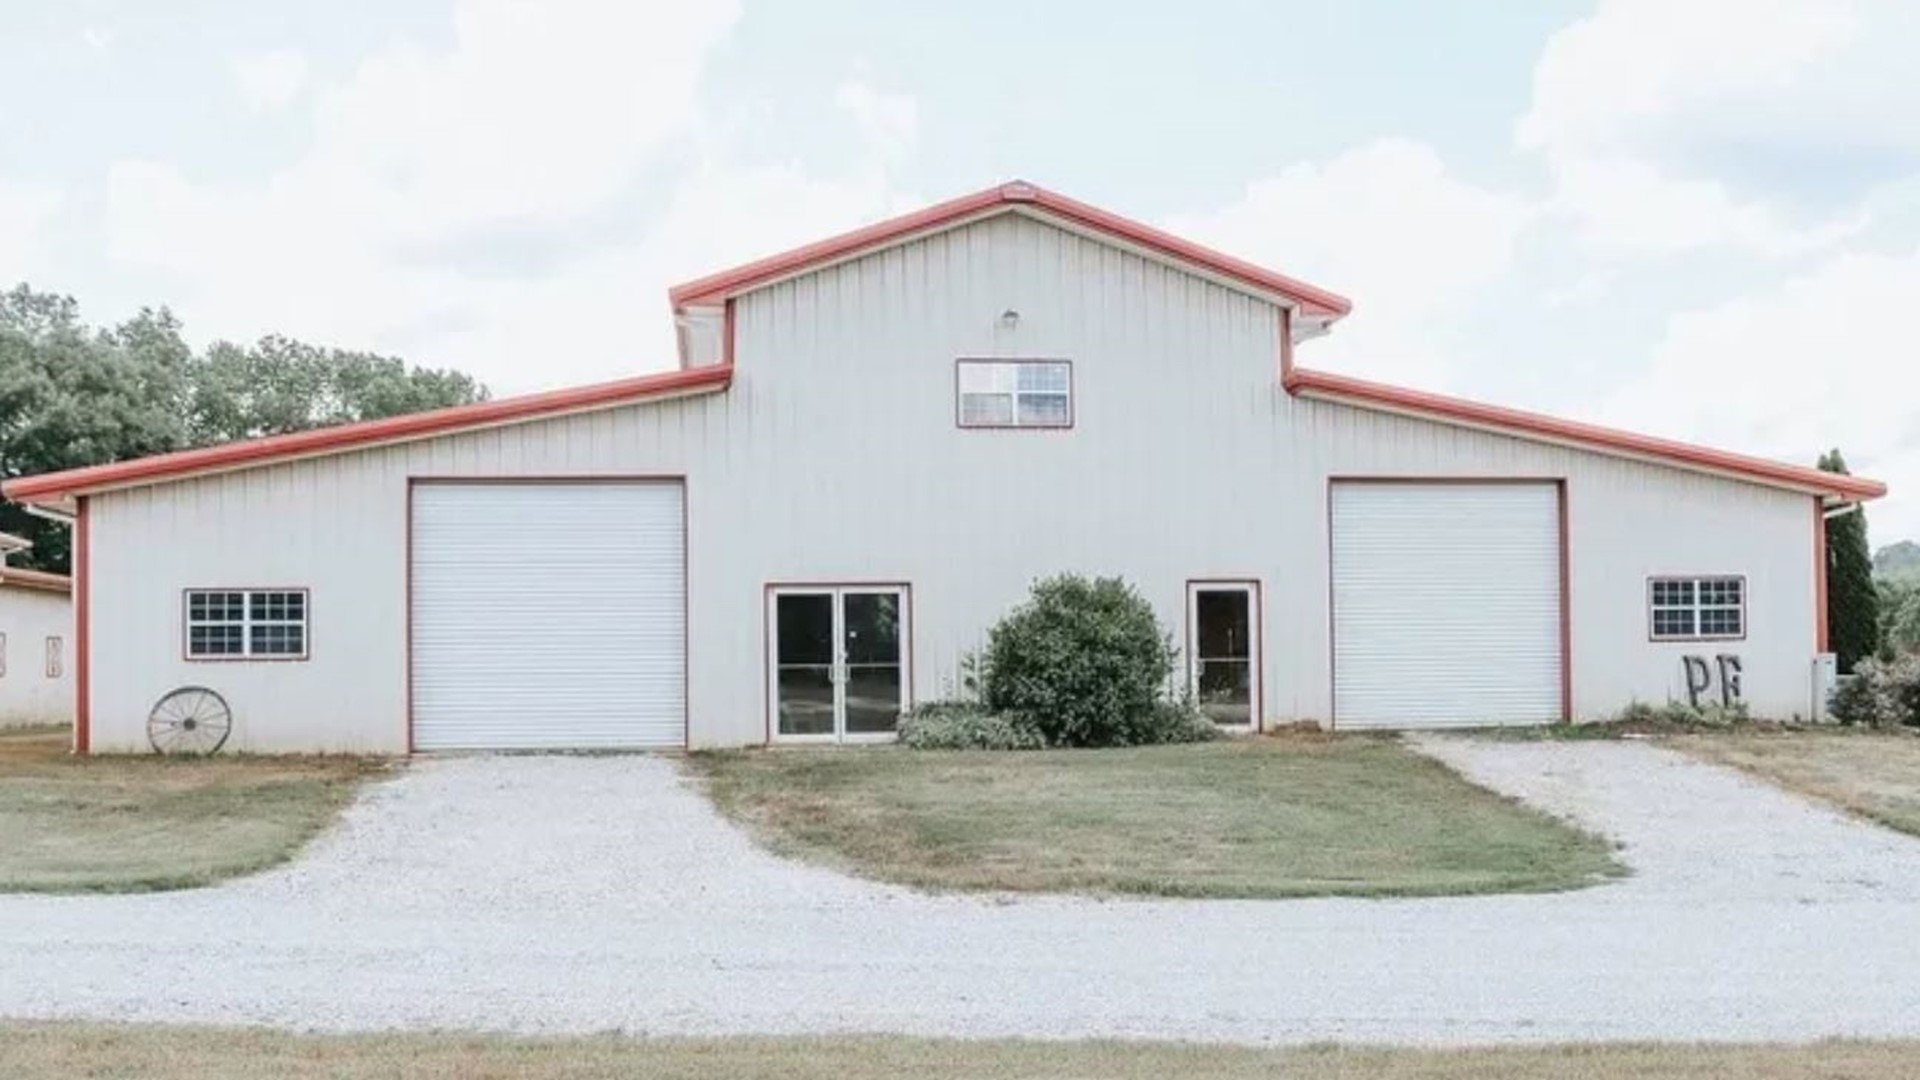 An online fundraiser has been set up for the owners of the farm as they hope to rebuild their barn and pick up the broken pieces of their hearts.